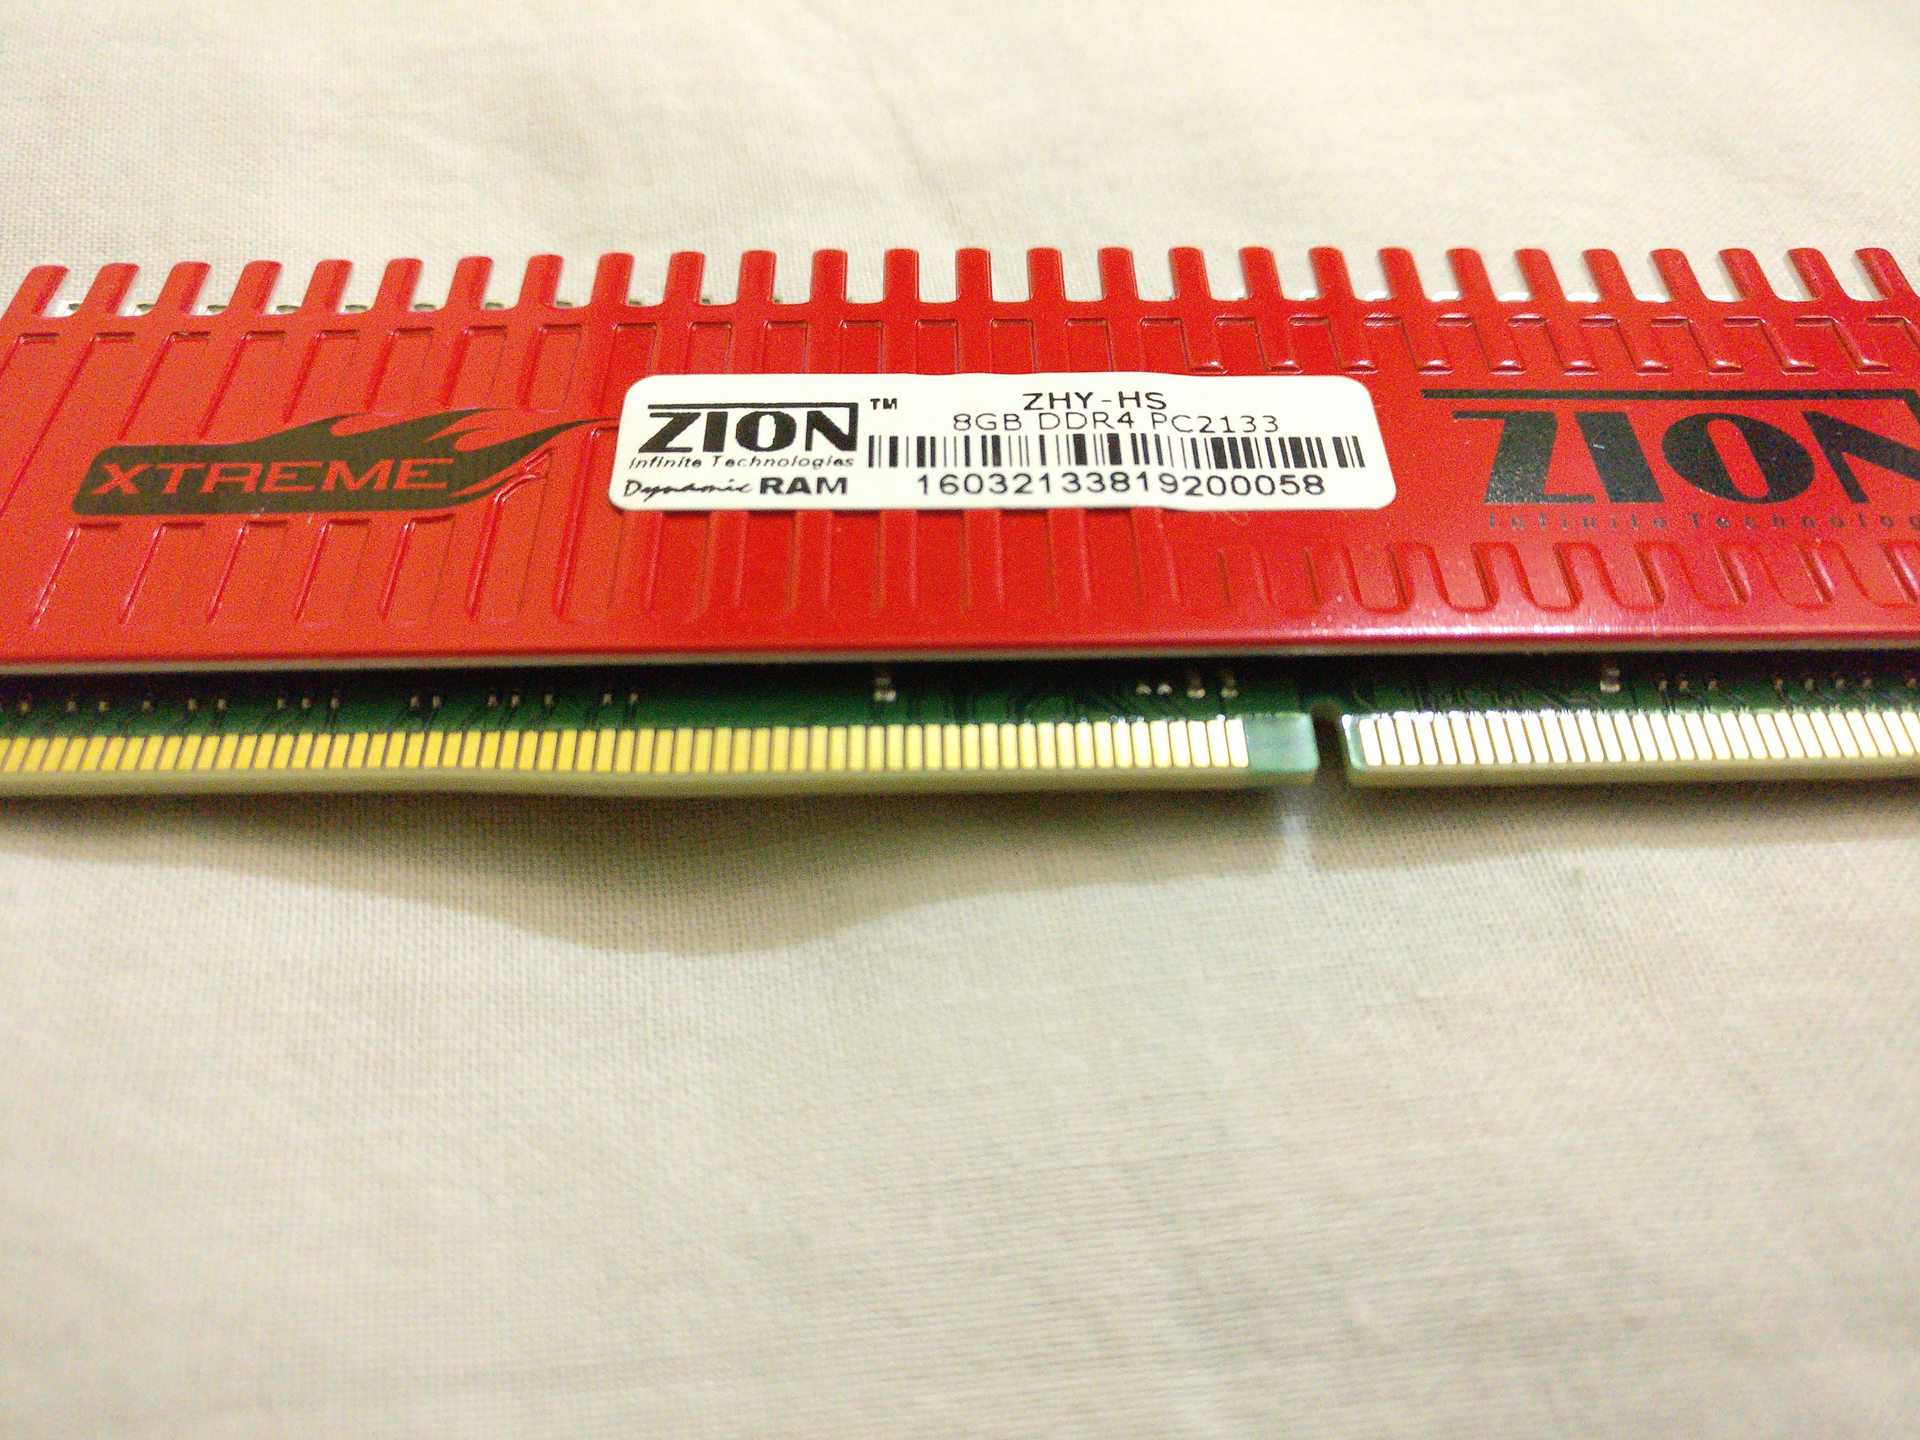 ZION Xtreme 8GB DDR4 2133 MHz RAM Specifications